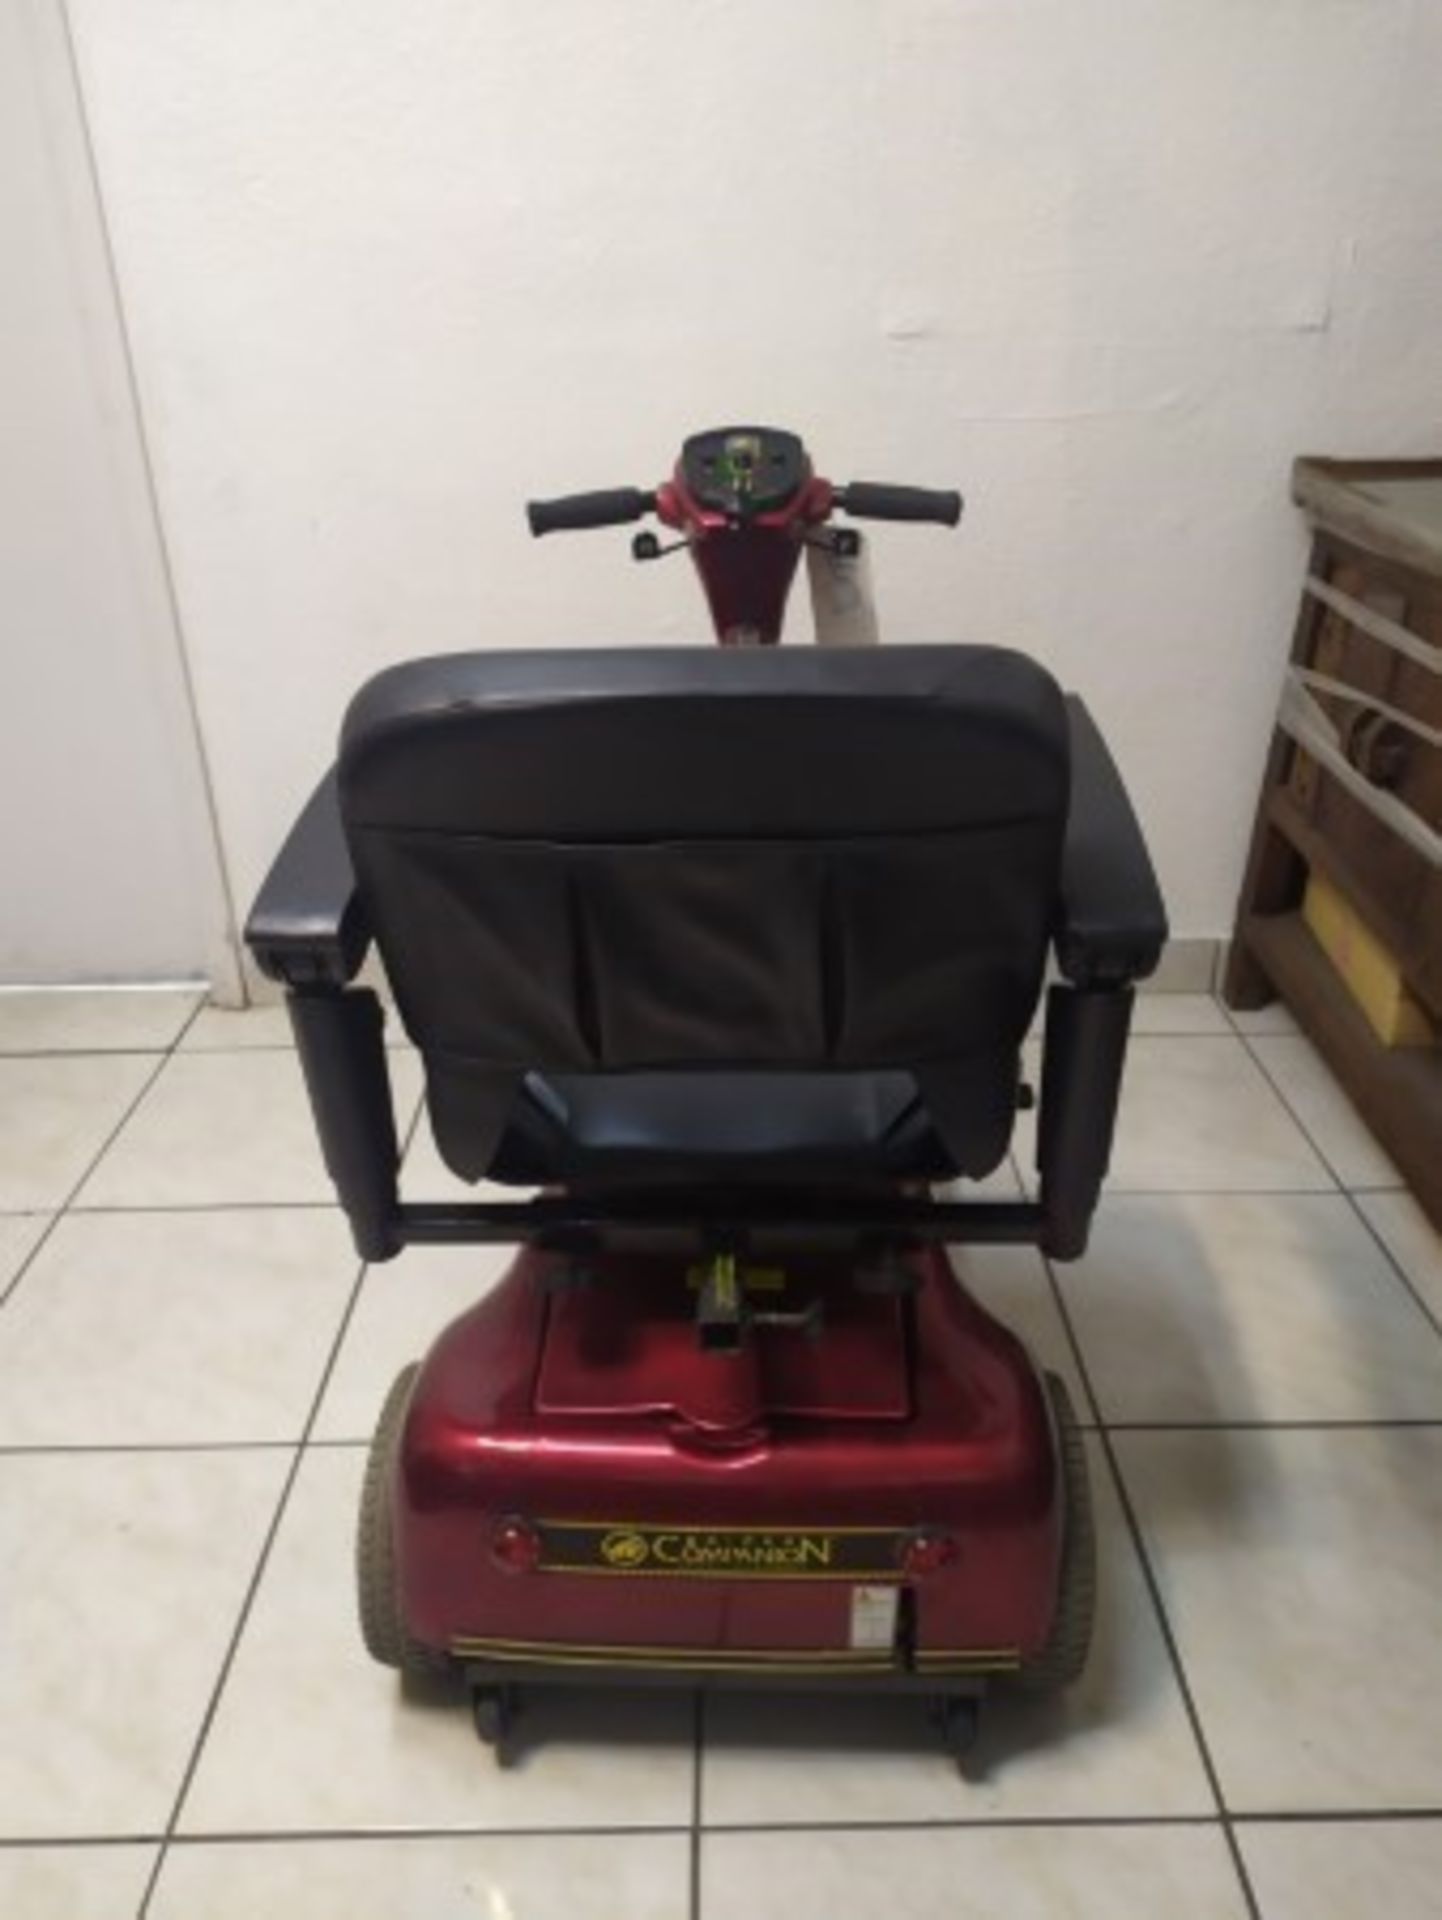 2005 GOLDEN COMPANION GC421 4-WHEEL SCOOTER WITH BUILT-IN CHARGER & BATTERY - RED - 400LB CAPACITY -